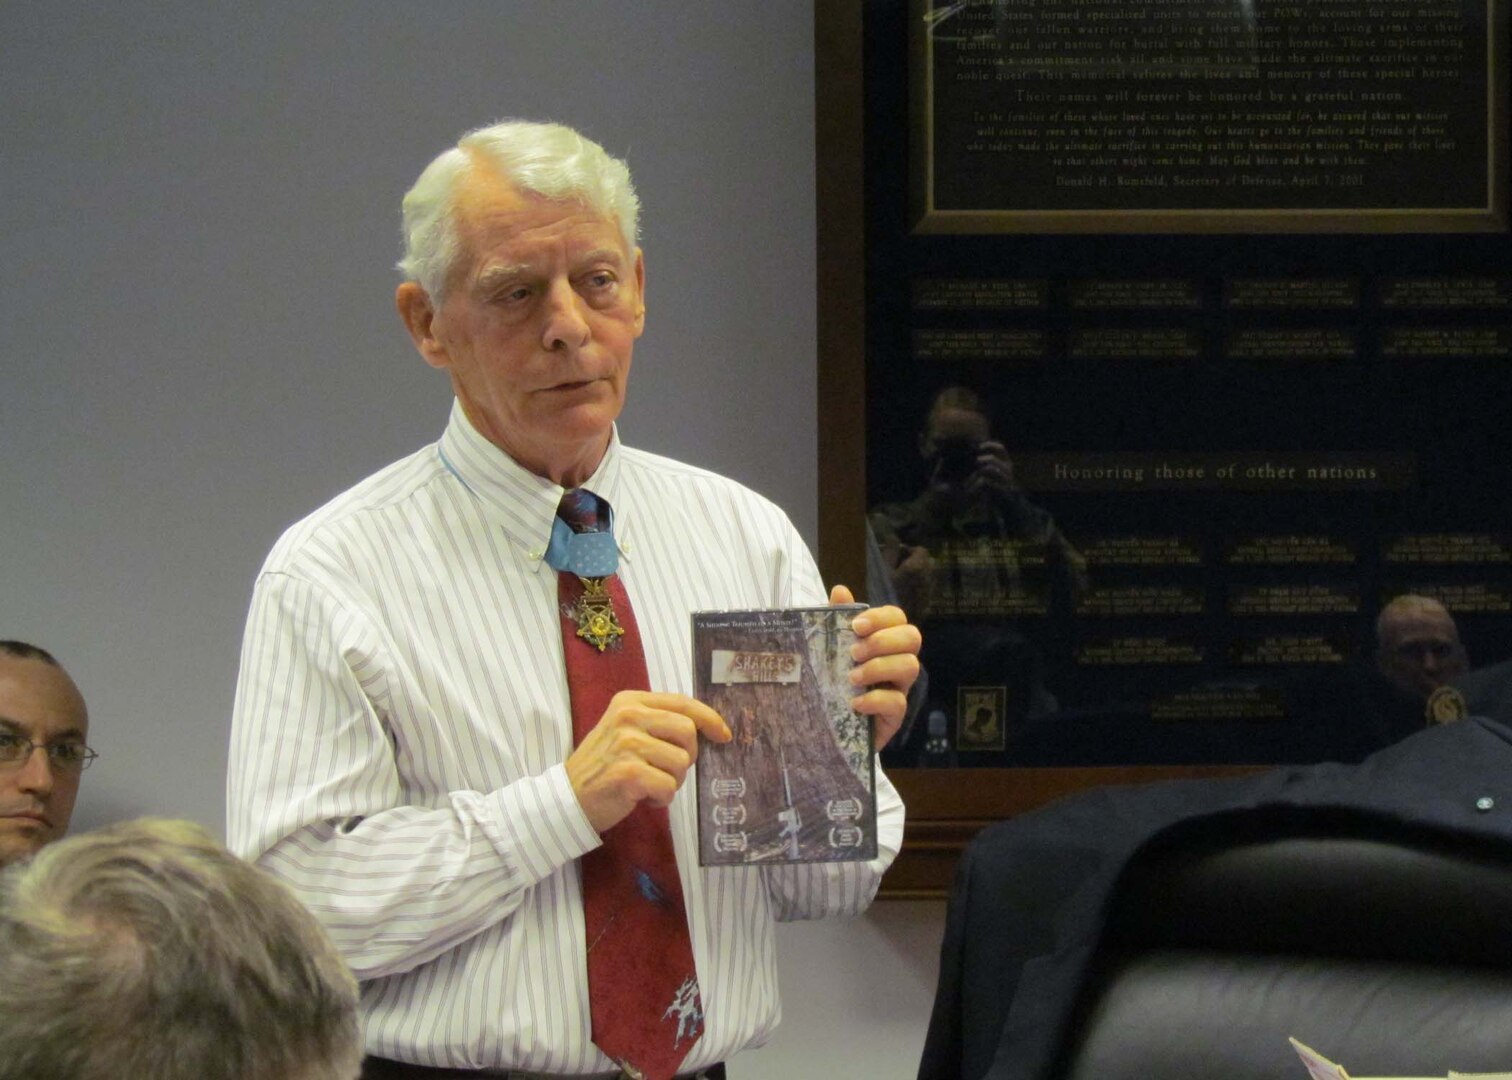 Medal of Honor recipient, retired Army Lt. Col. James “Mike” Sprayberry spoke with employees of the Defense POW/MIA Accounting Agency in Arlington, Virginia, Nov. 9.  Sprayberry served two tours in Vietnam and was awarded the Medal of Honor as a result of his heroic actions in April 1968 during Operation Delaware in the A Shau Valley, where he neutralized enemy forces and saved numerous Soldiers.